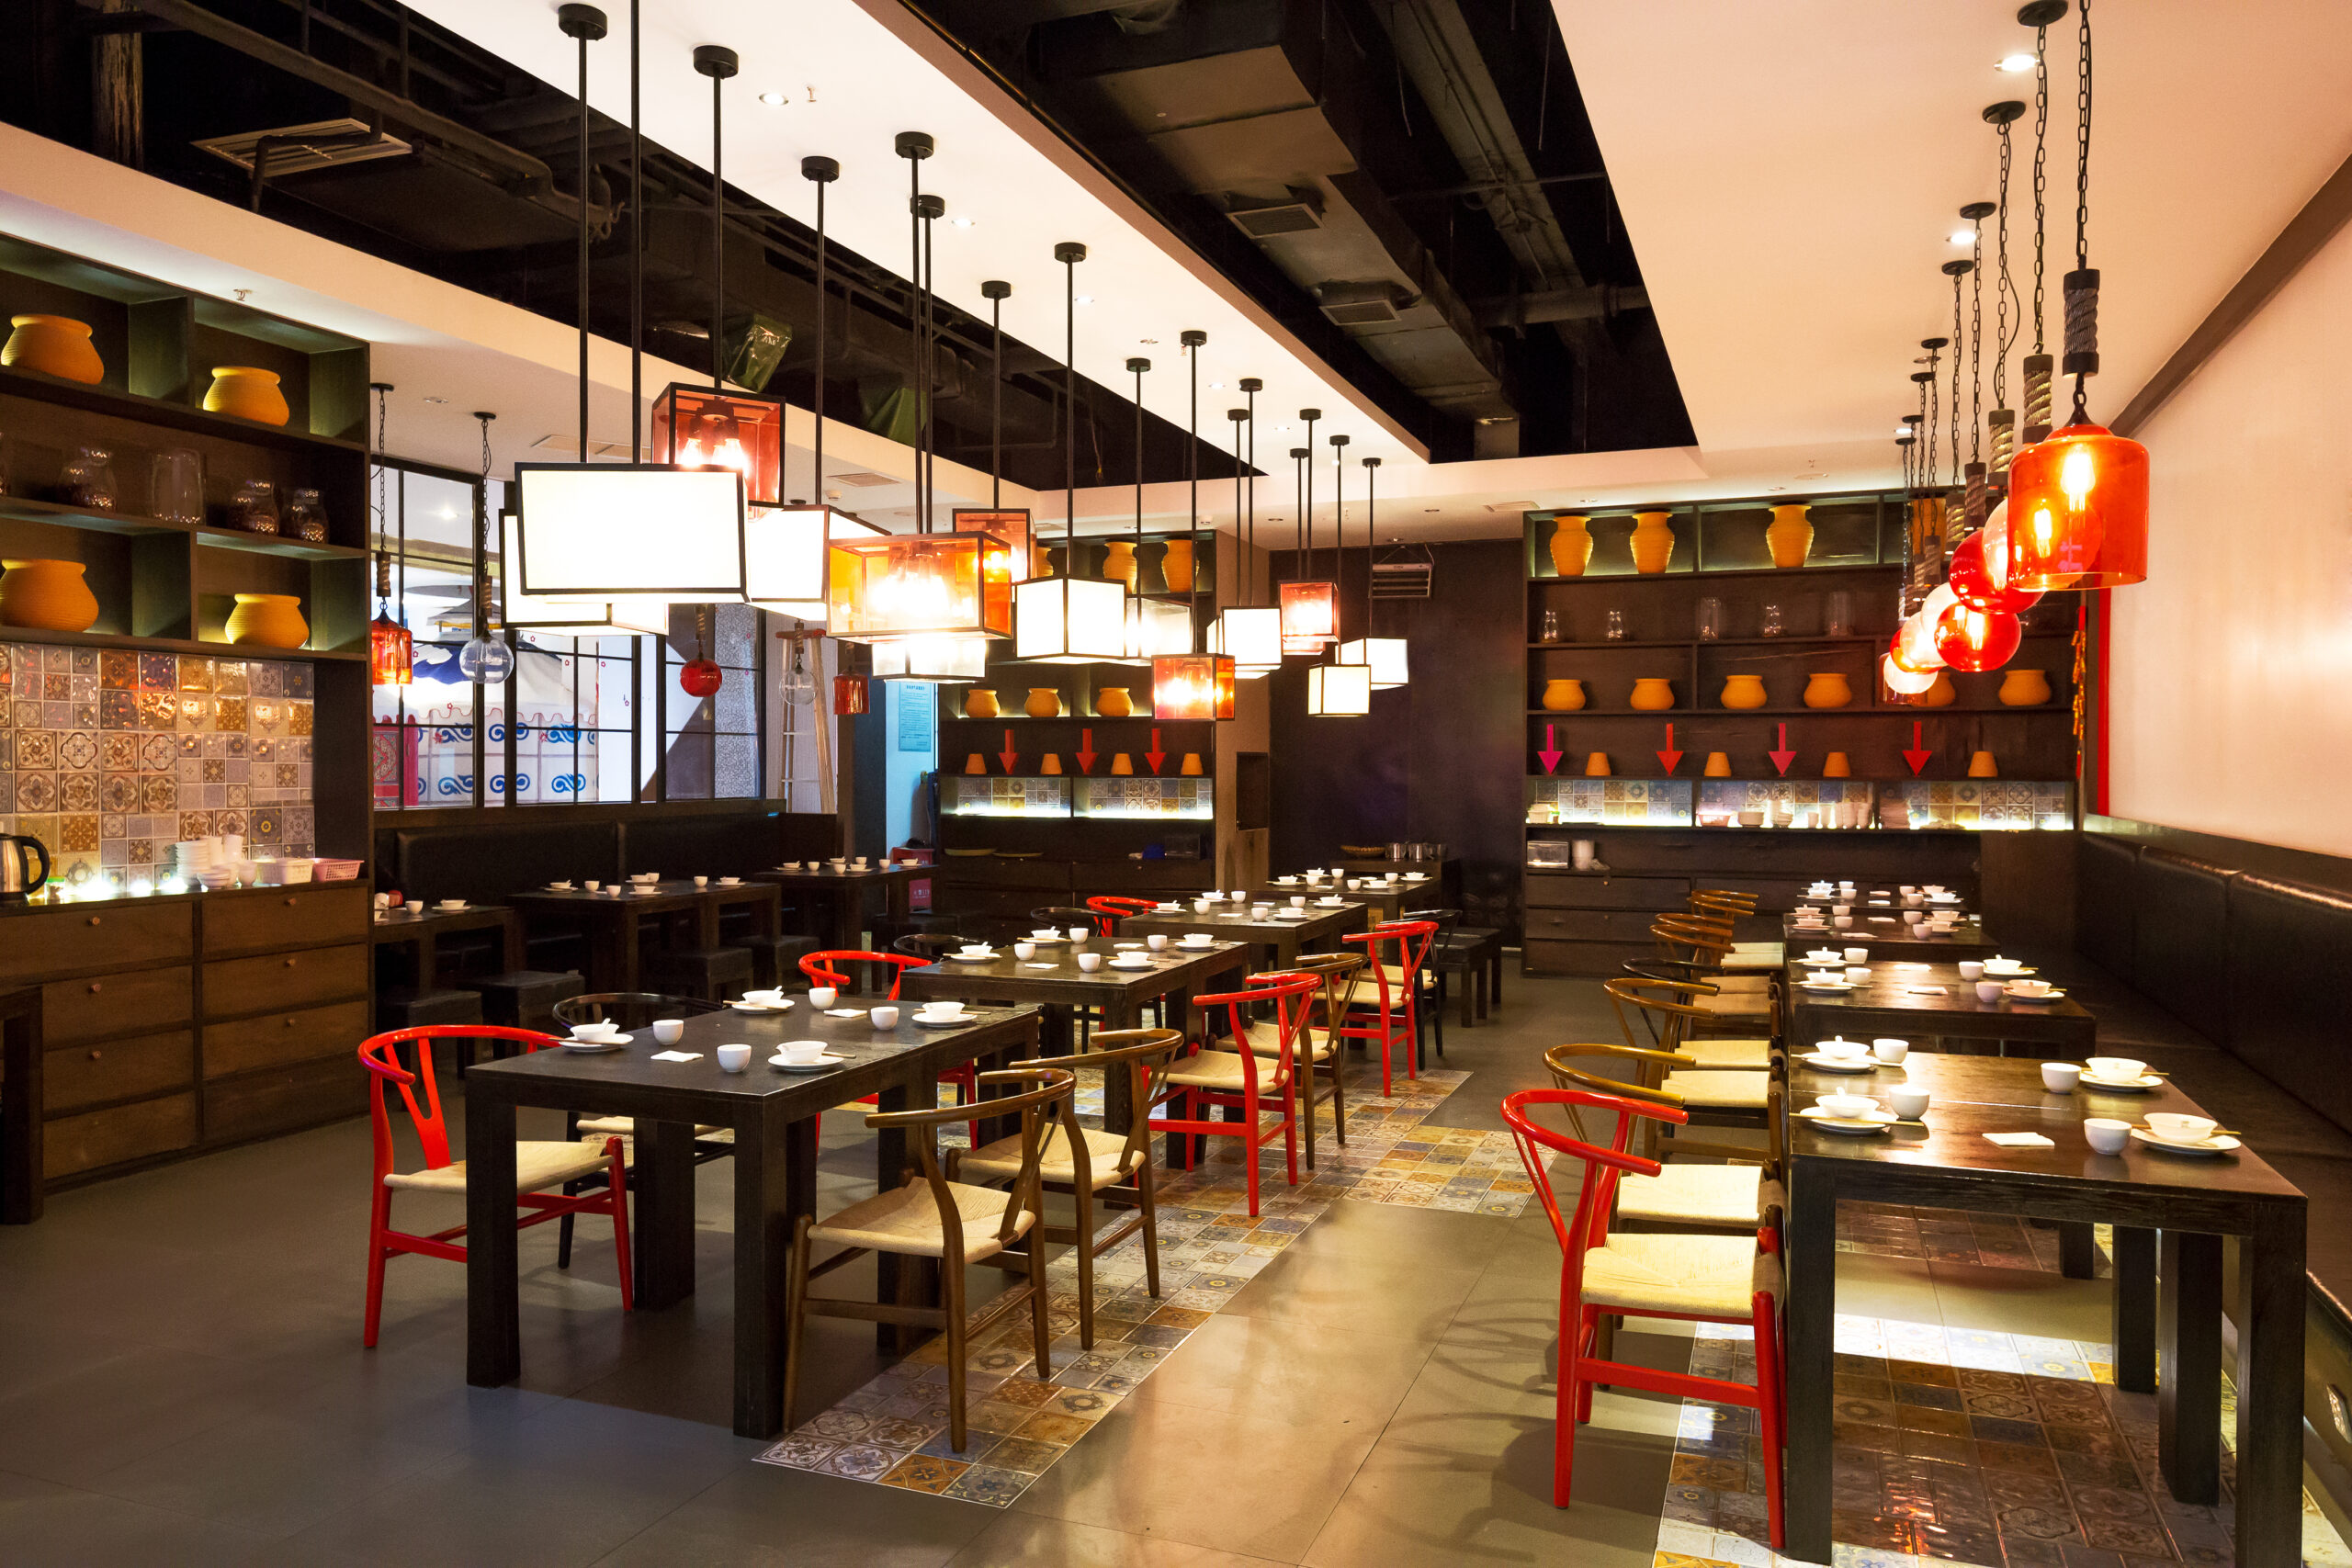 Restaurant Furniture and Decor: Top Ideas to Attract Customers